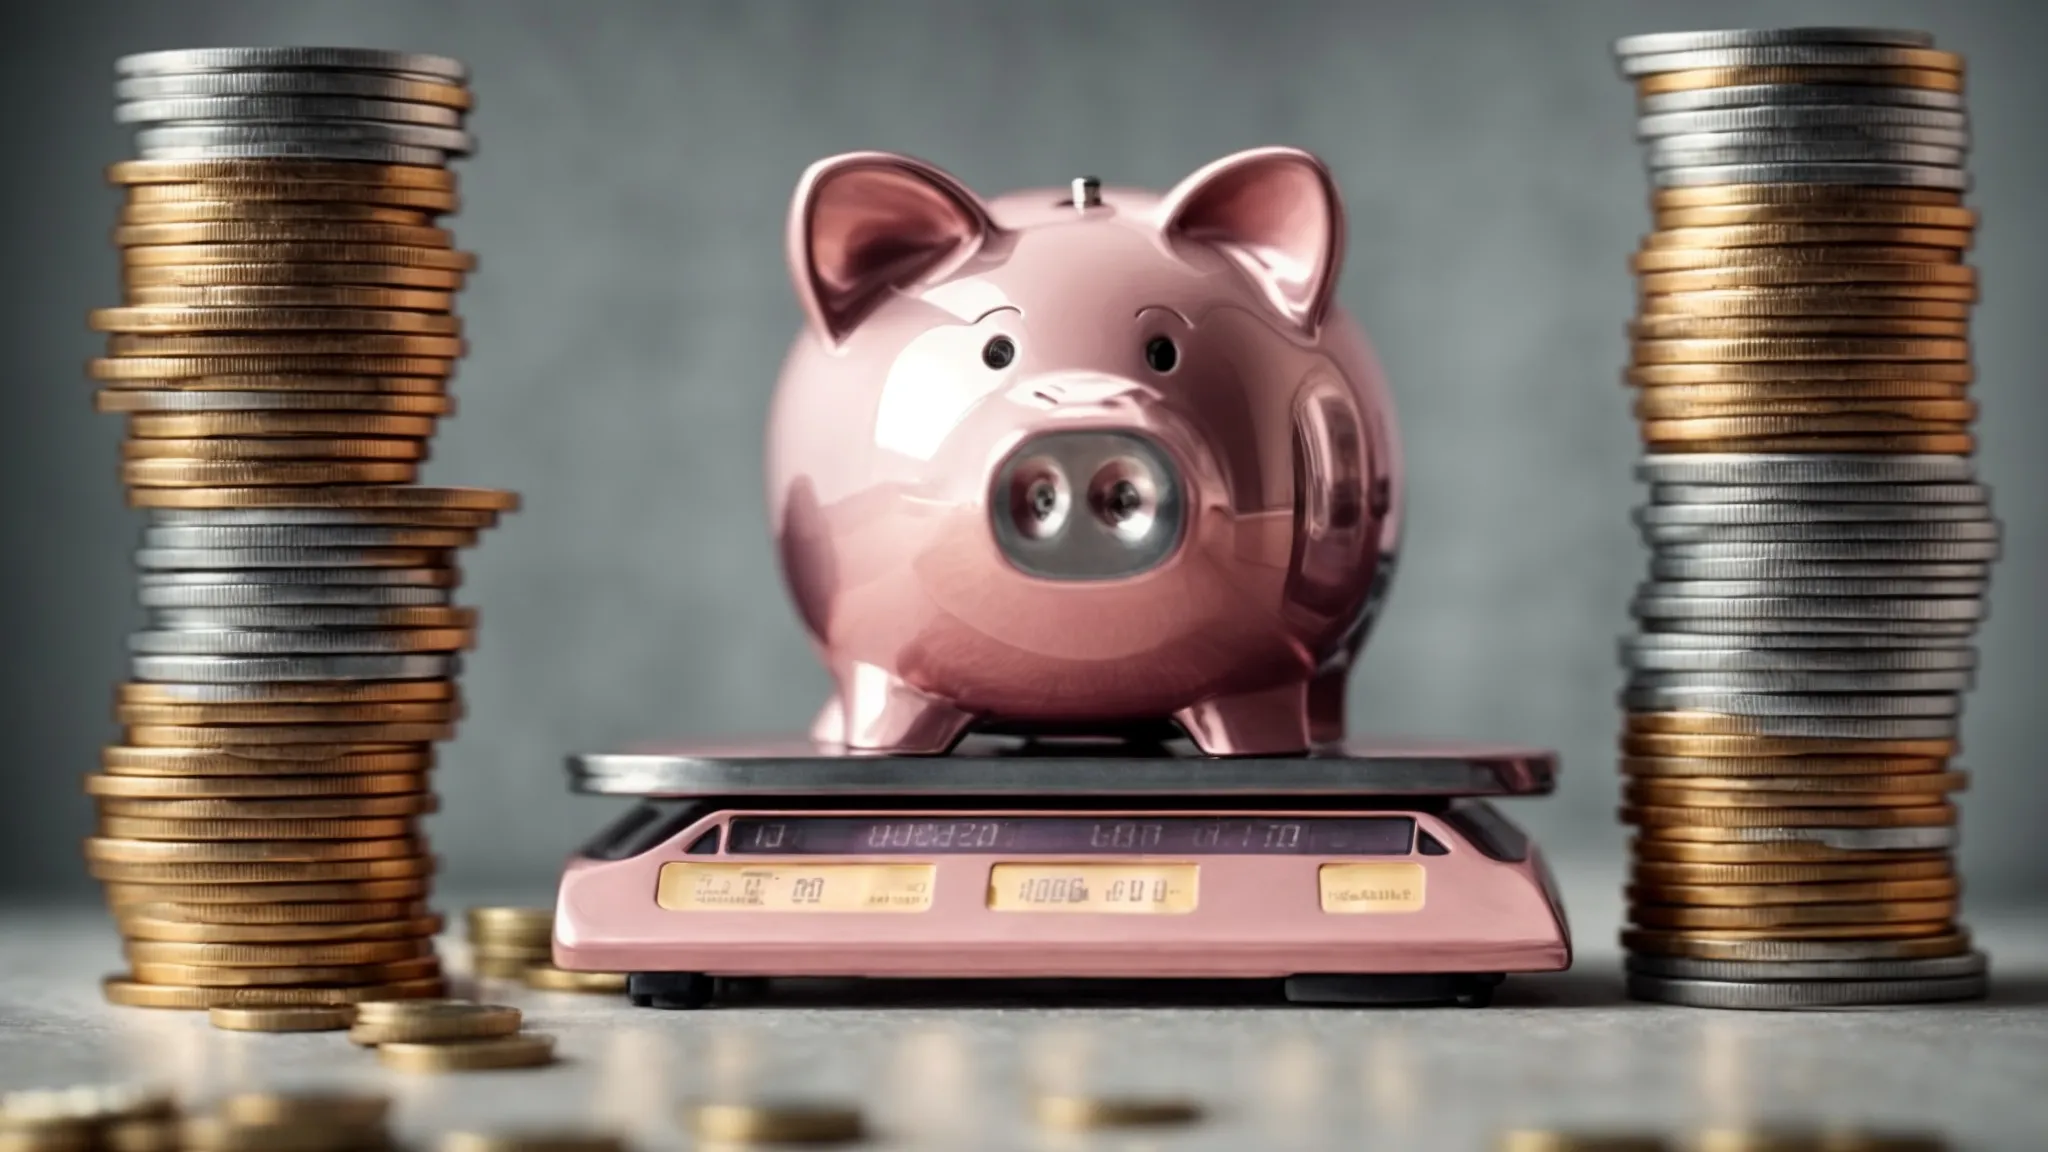 a scale perfectly balanced with stacks of coins on one side and a piggy bank on the other, illustrating financial equilibrium.